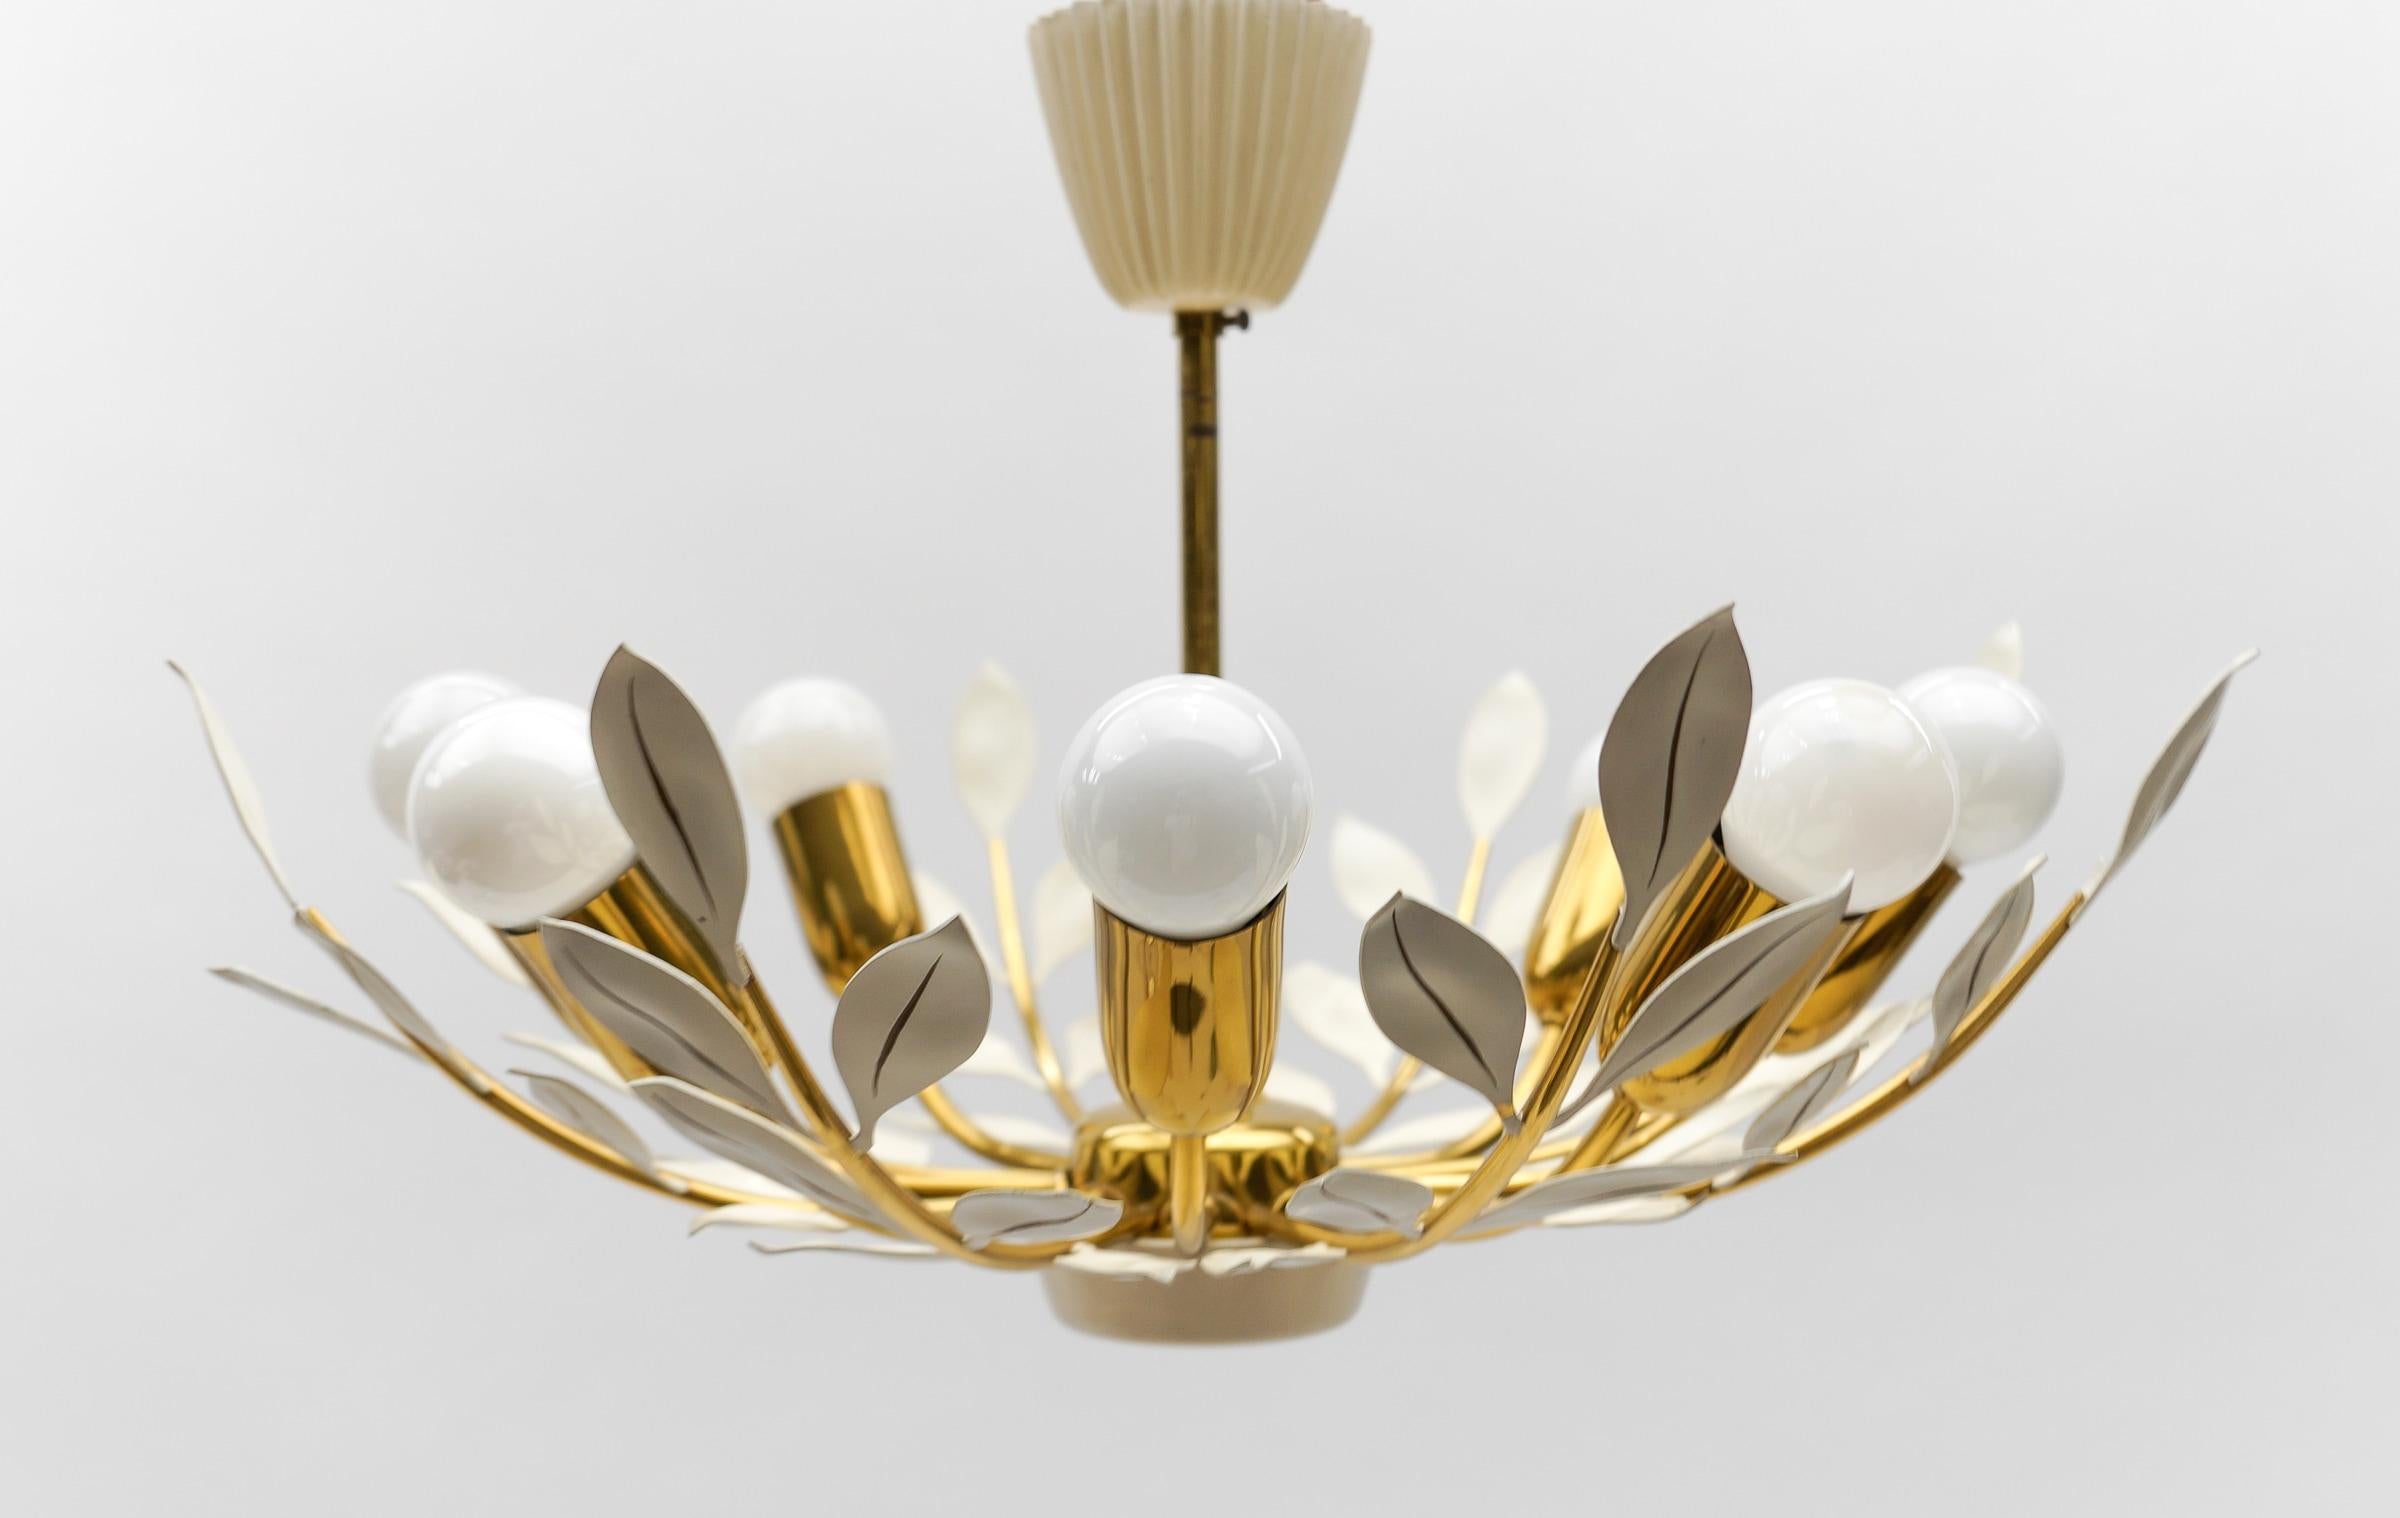 Mid-20th Century 1. of 2 Lovely Ceiling Lamp by Vereinigte Werkstätten München, 1950s Germany   For Sale